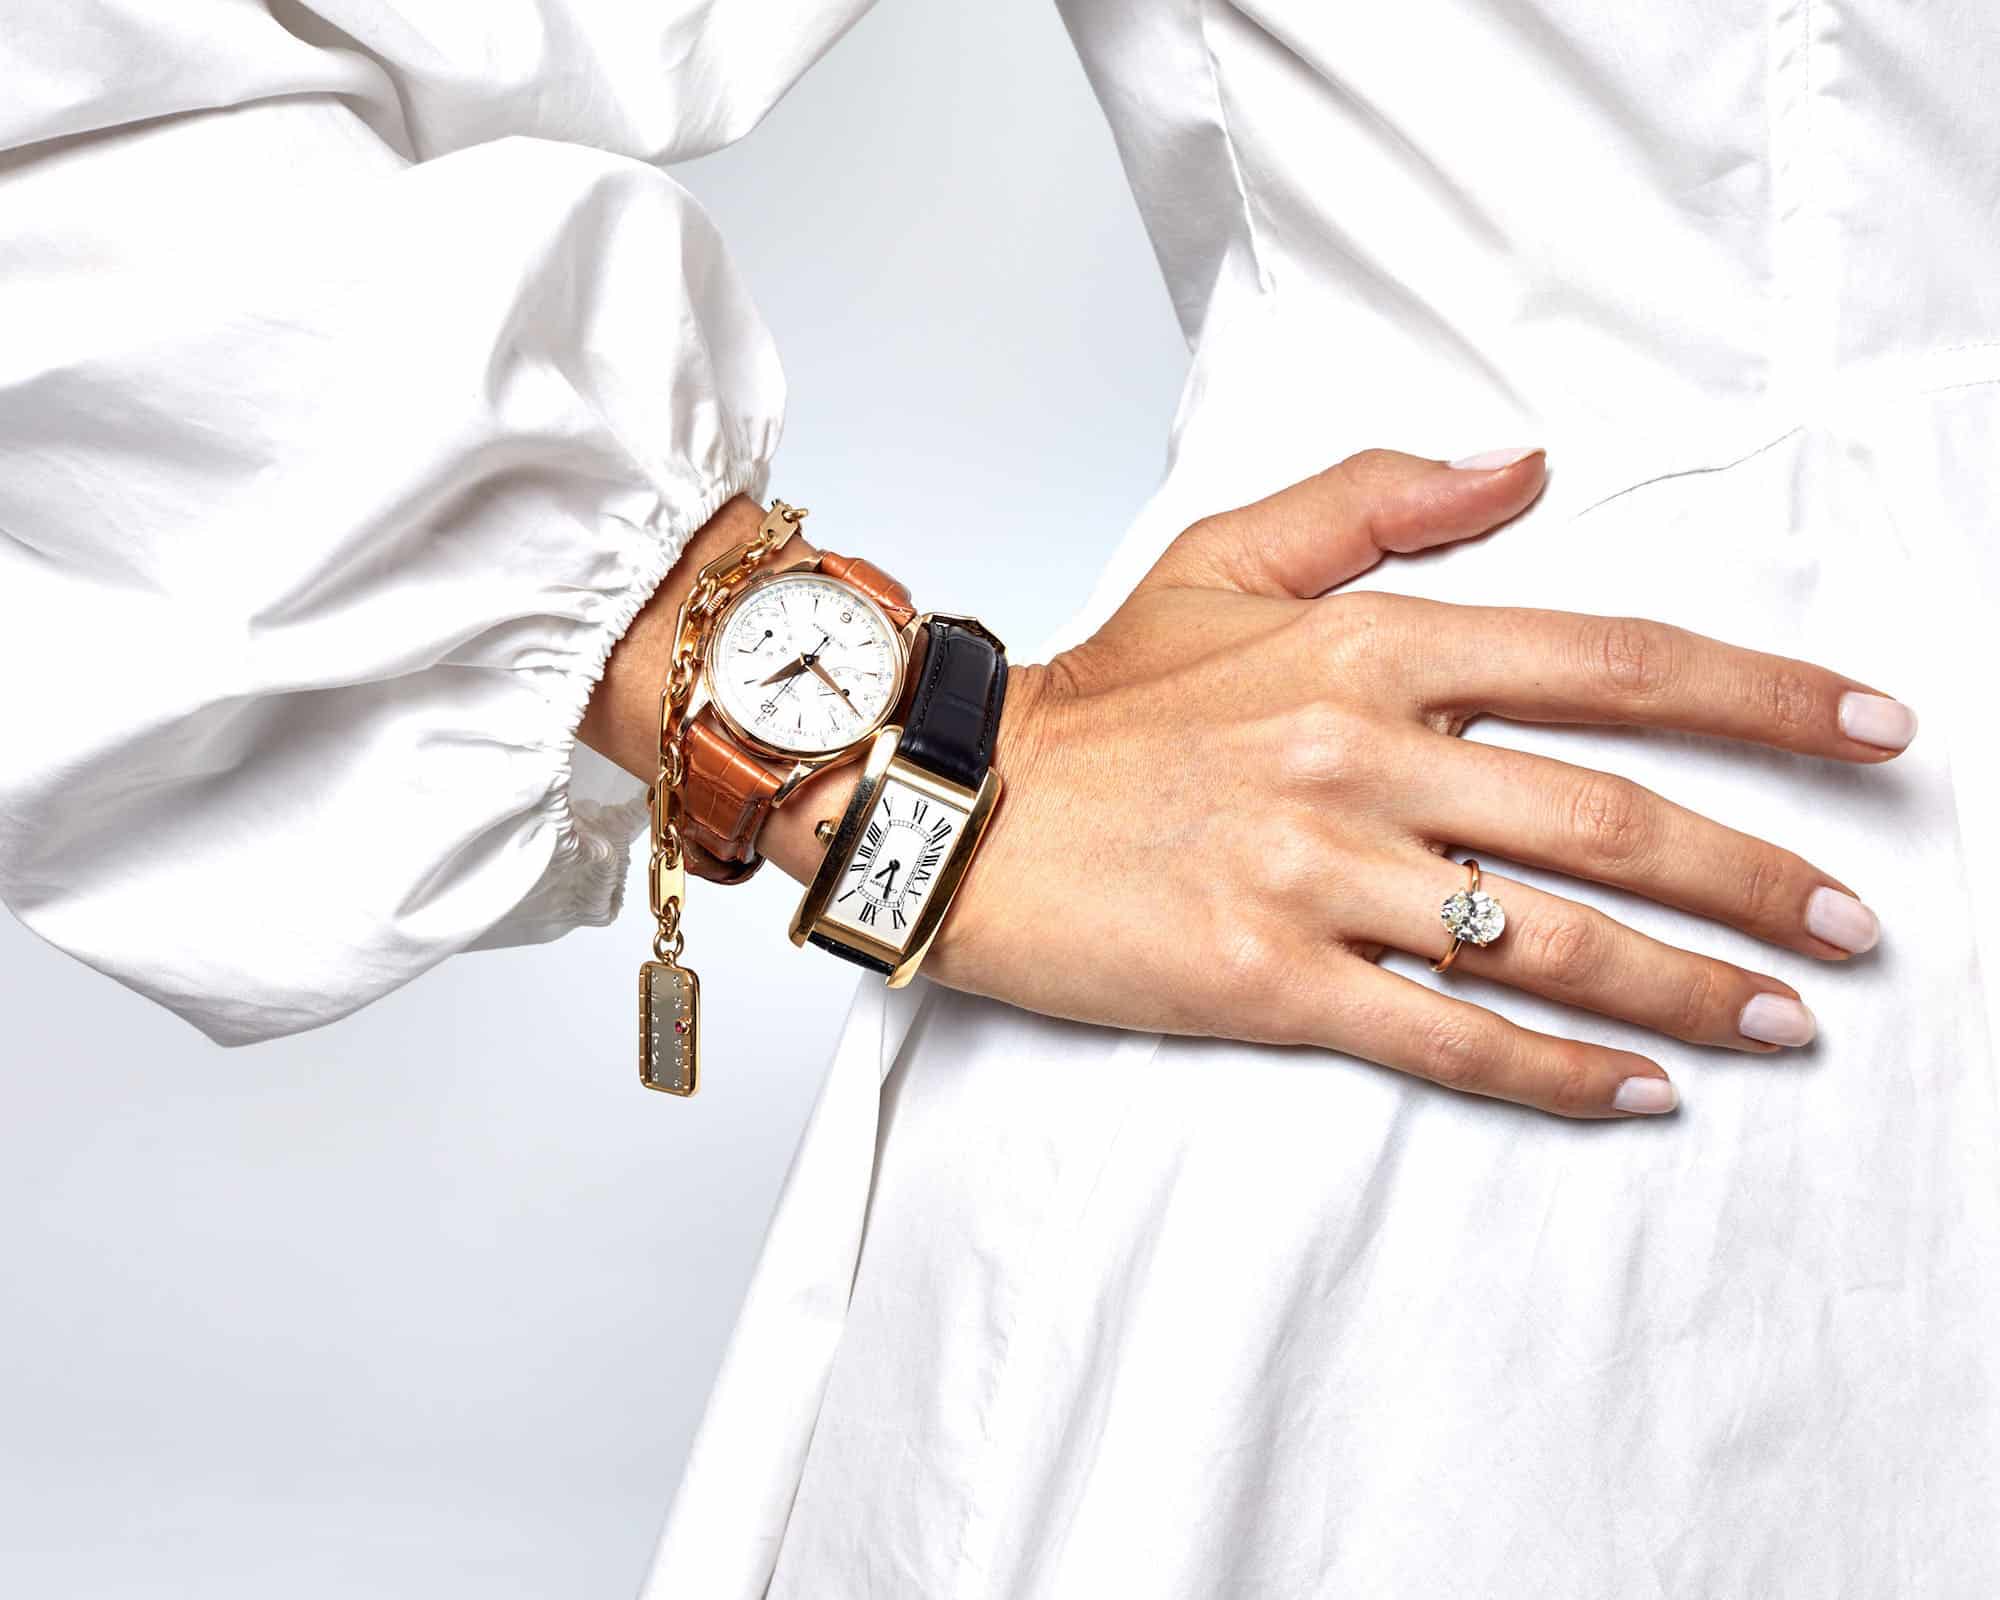 Why More Women Are Wearing Men’s Watches